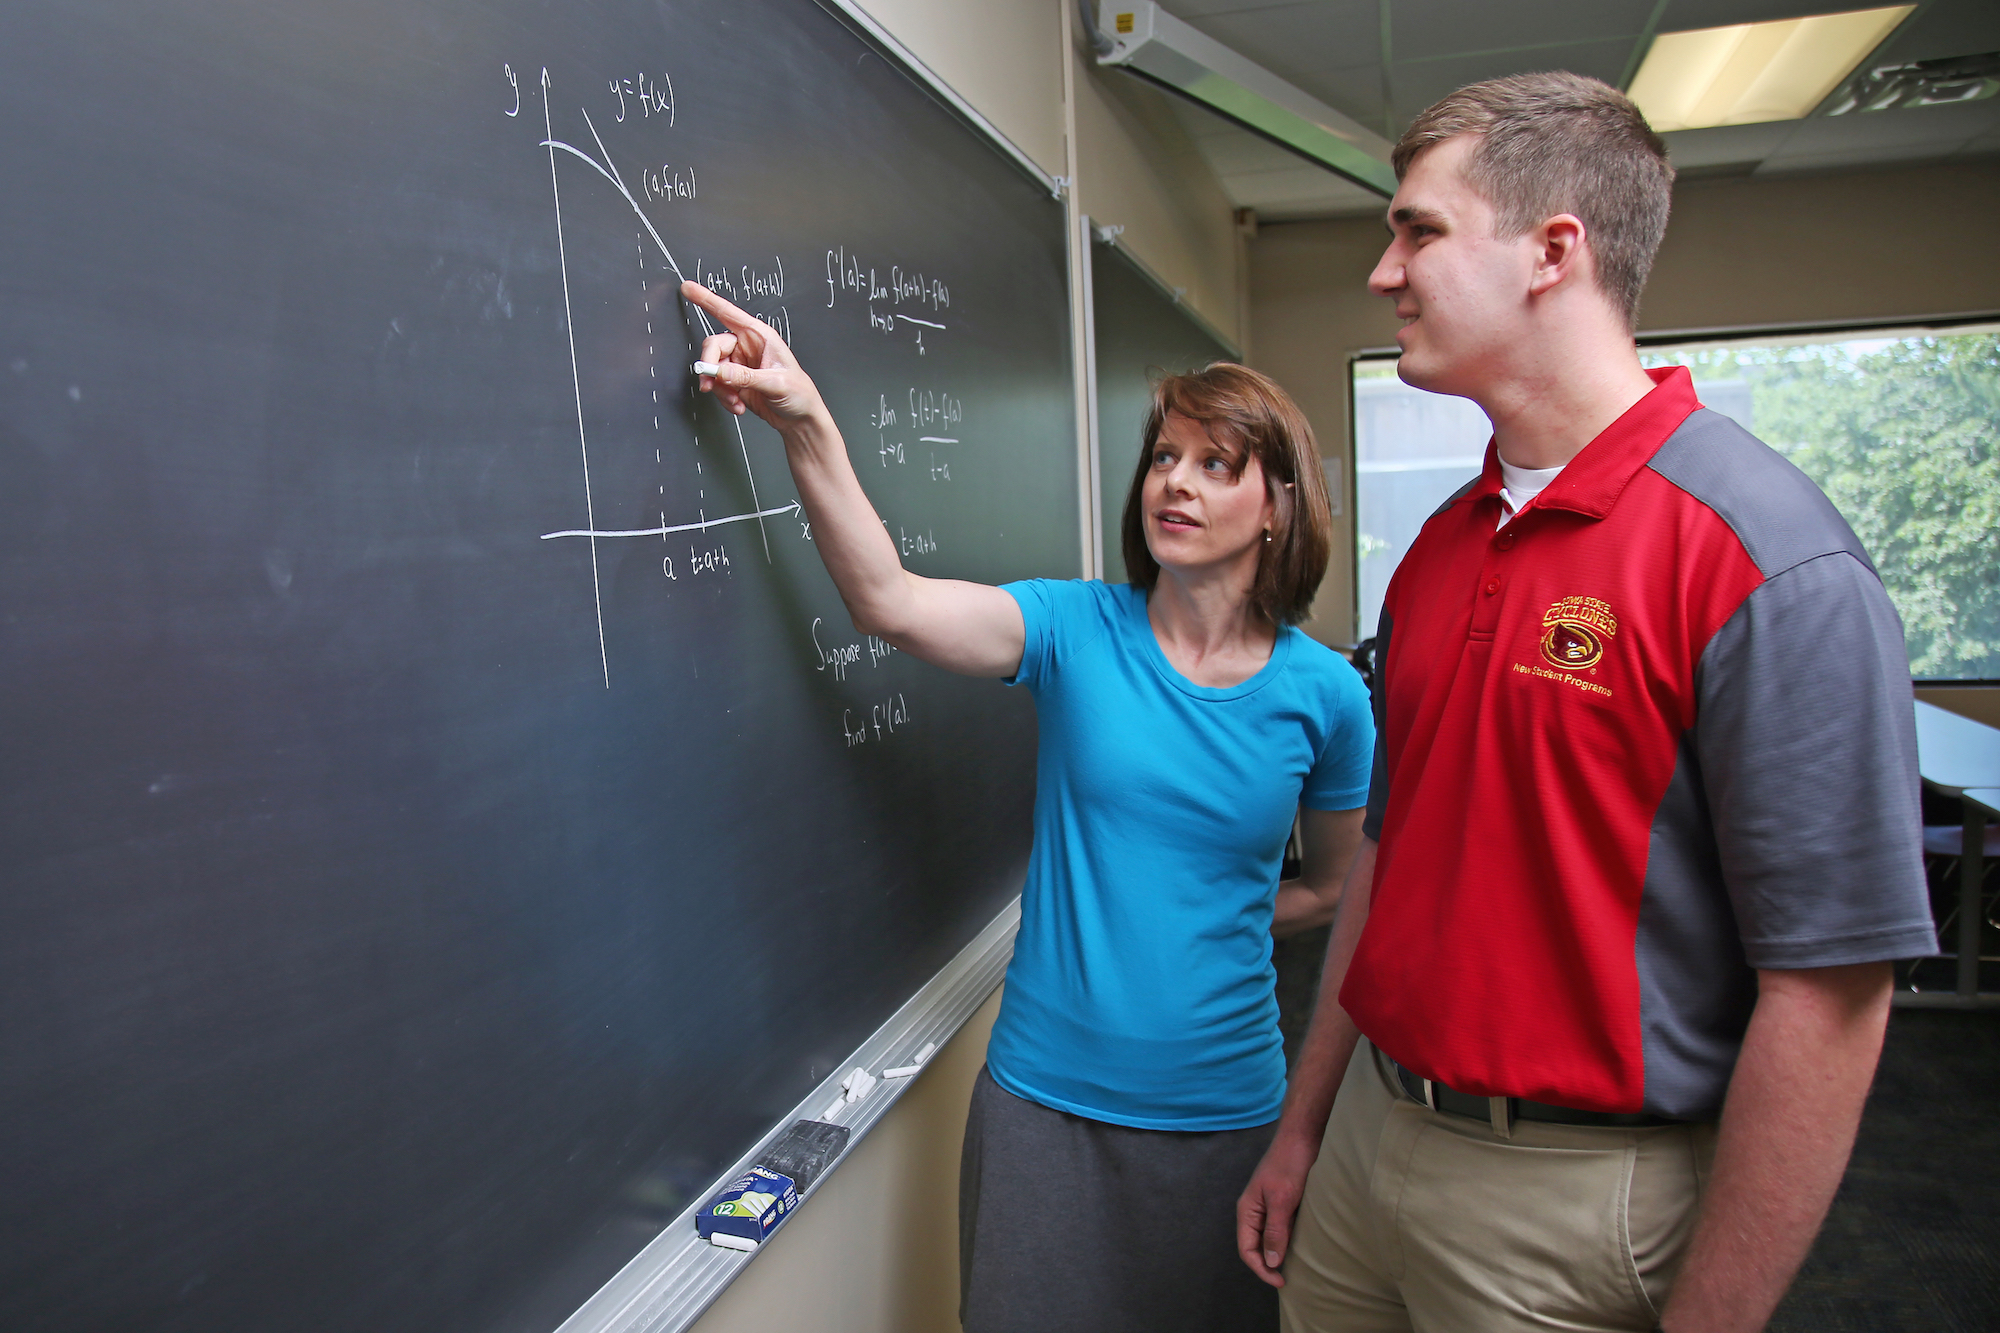 Heather Bolles, senior lecturer in mathematics, stands at a blackboard with a student, explaining the definition of derivative at a point of the graph.